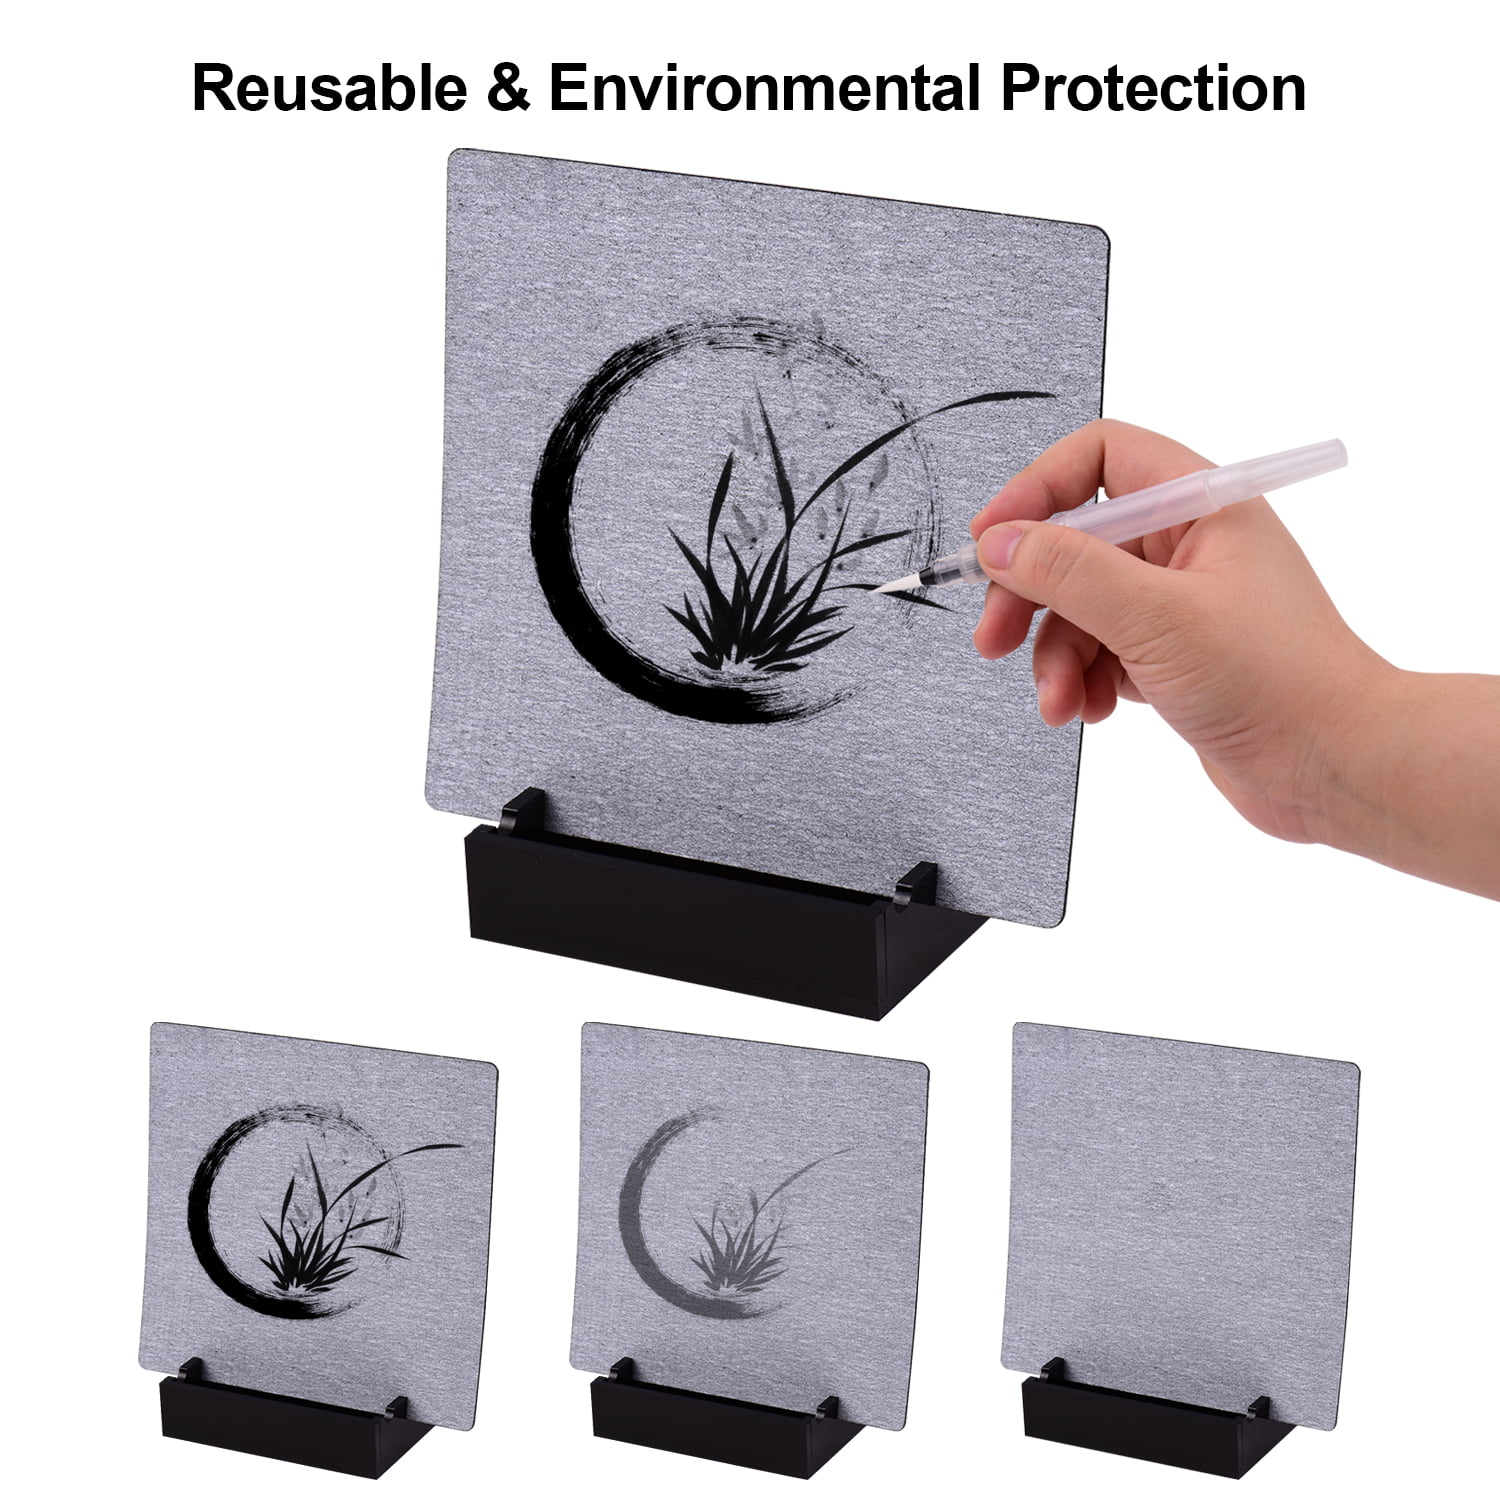 Rantoloys Reusable Buddha Board Artist Board Paint with Water Brush & Stand Release Pressure Relaxation Meditation Art Mindfulness Relaxing Gift for Children Students Teenagers Adults Drawing Painting 